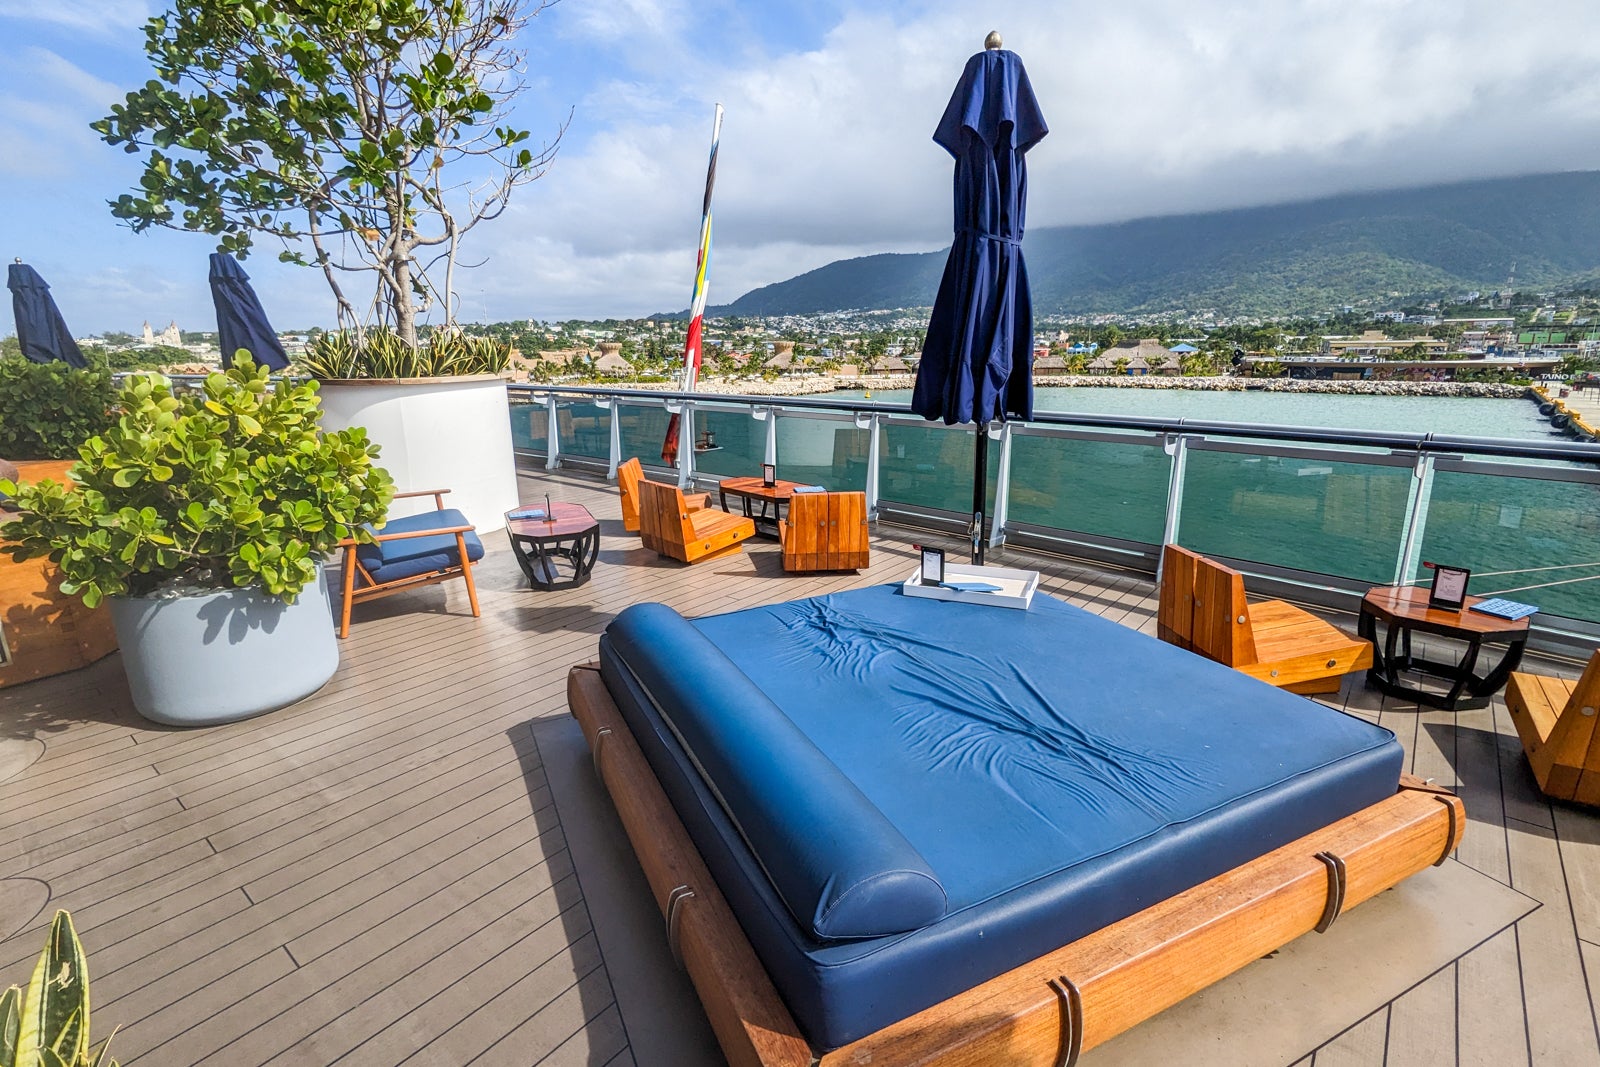 Outdoor cruise ship lounge with blue day beds and wooden seating areas